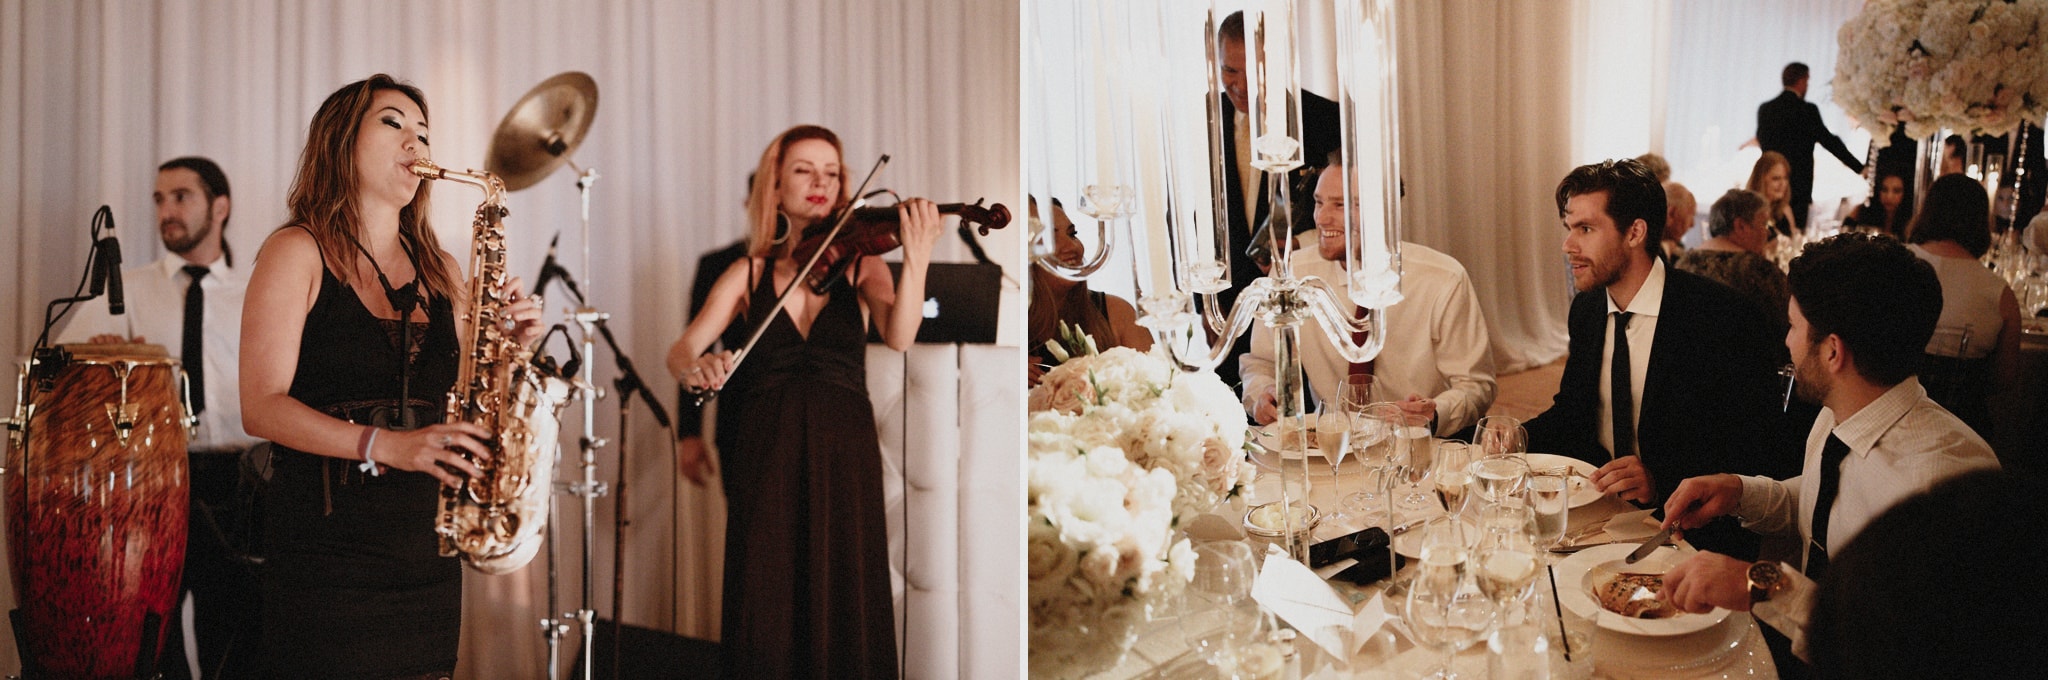 A band including a saxophonist, violinist and drummer play at a Newport Beach wedding reception at The Resort at Pelican Hill.